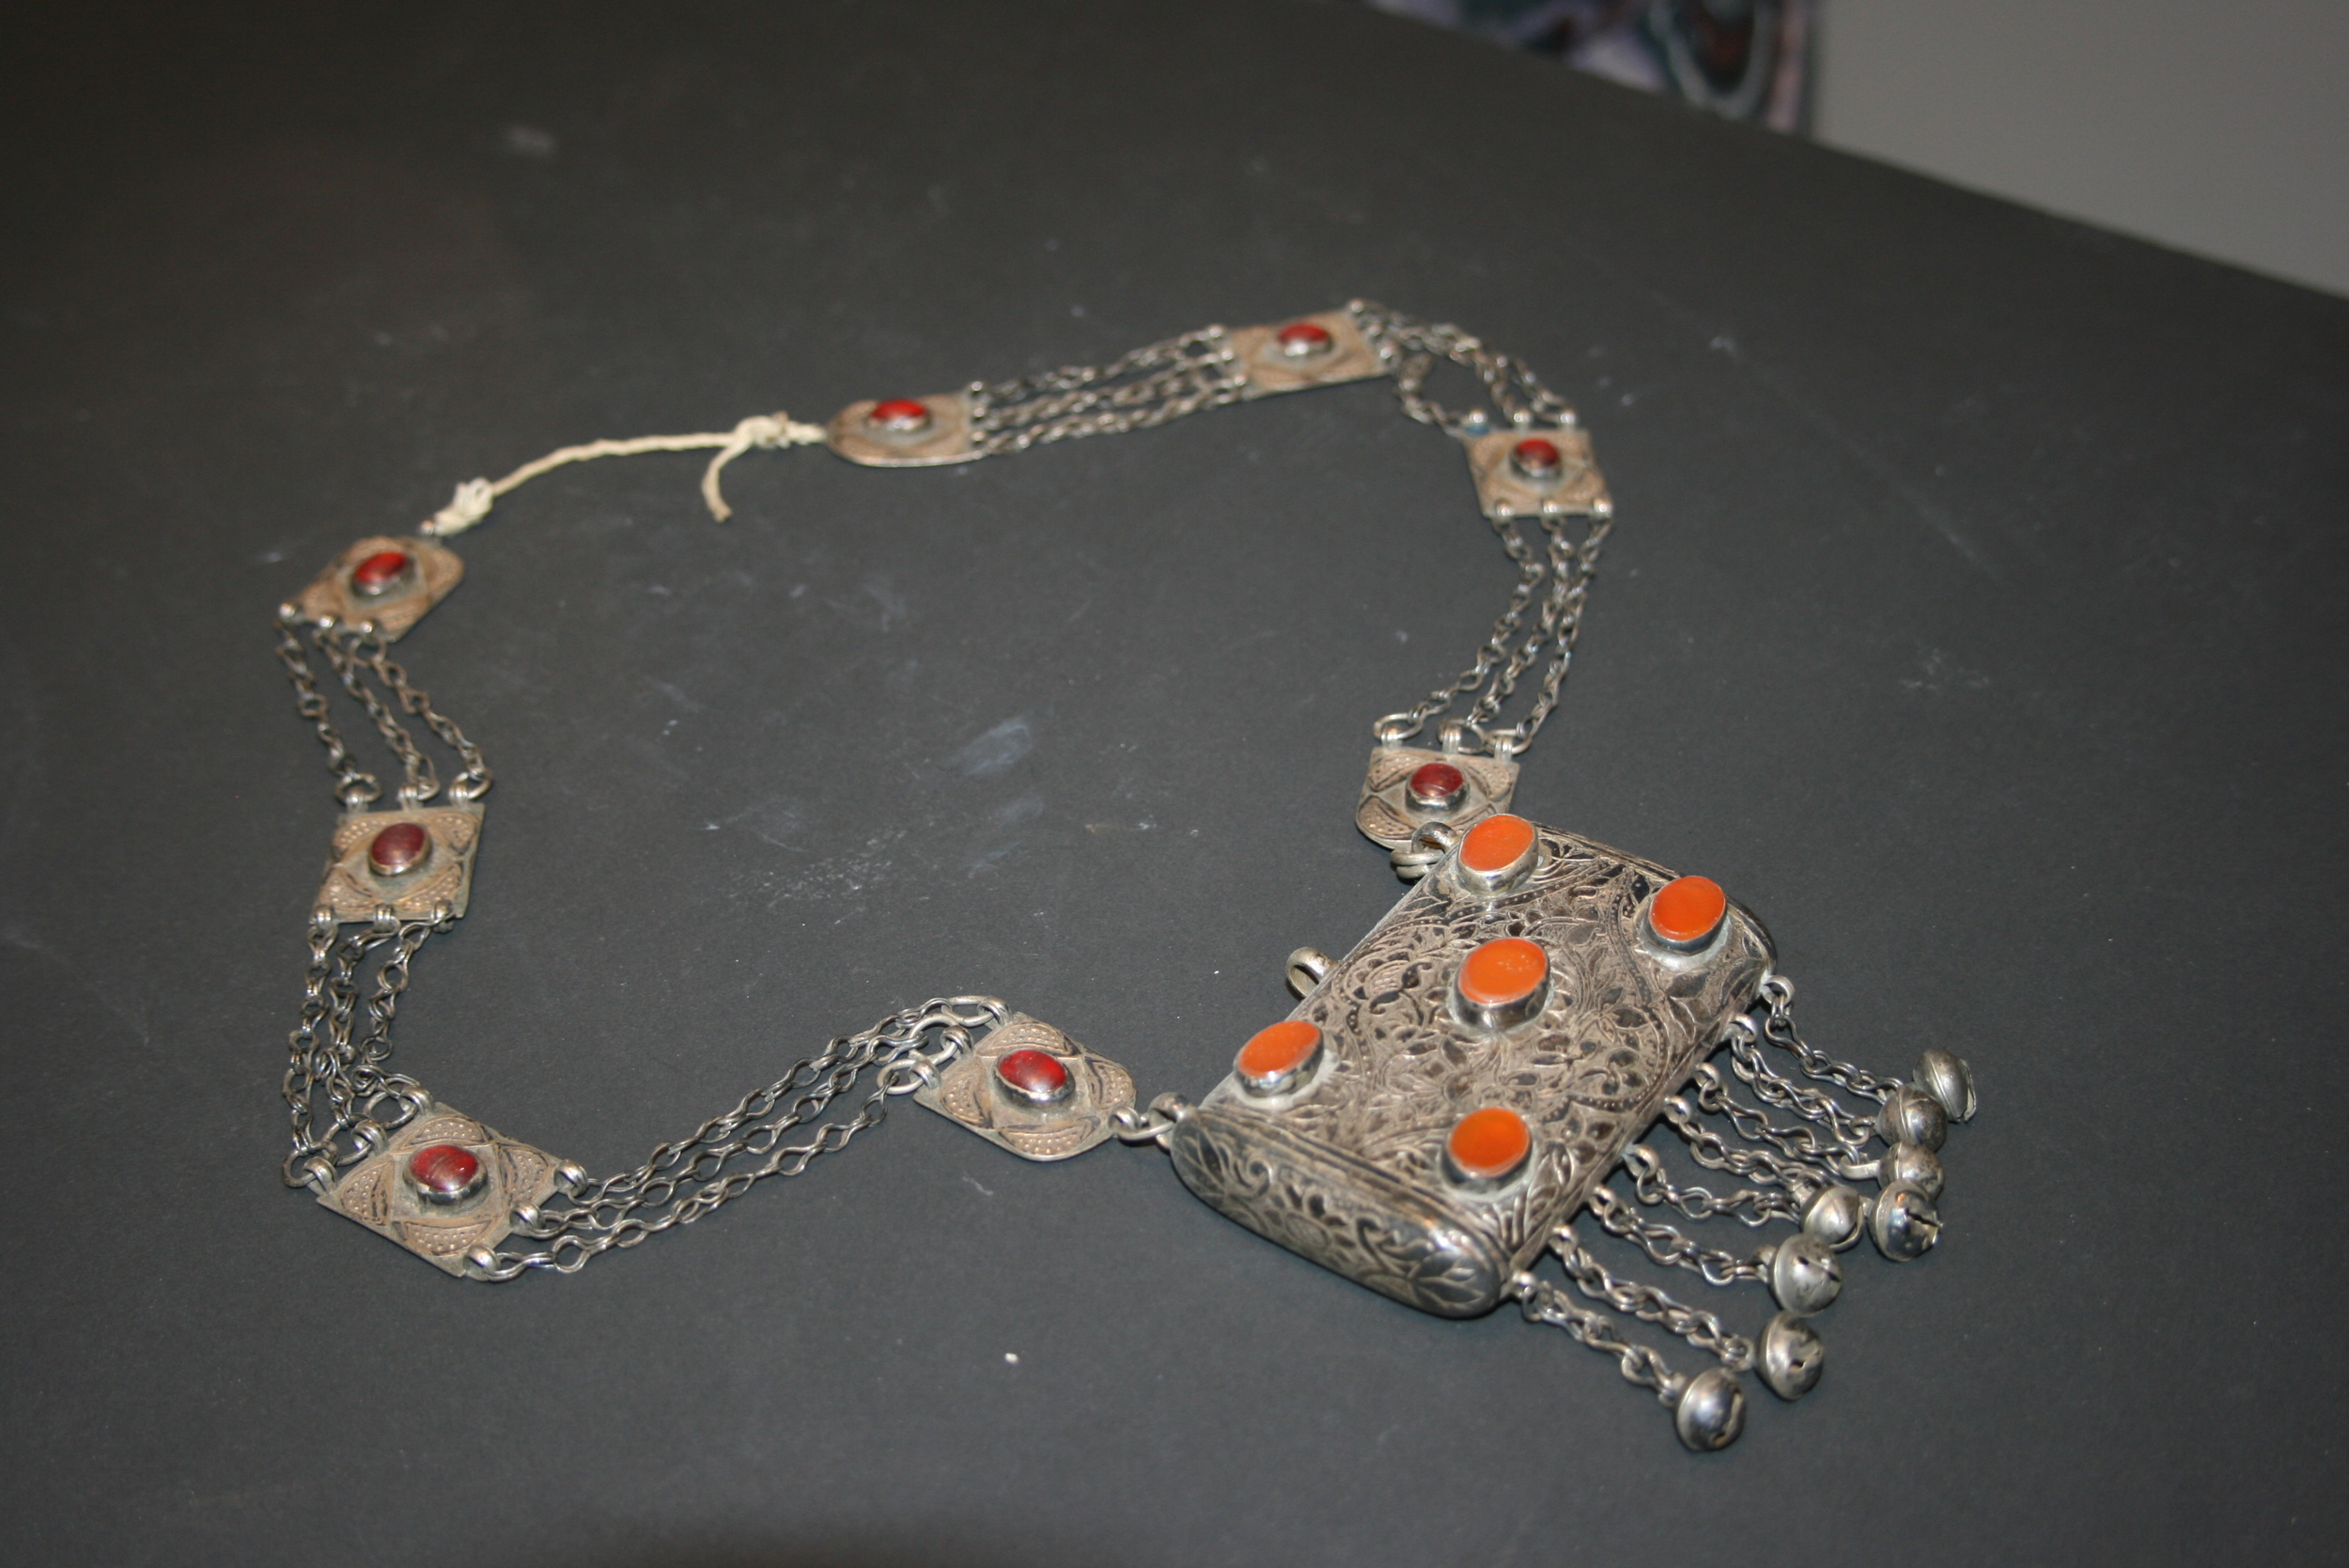 Old late 19th century amulet necklace